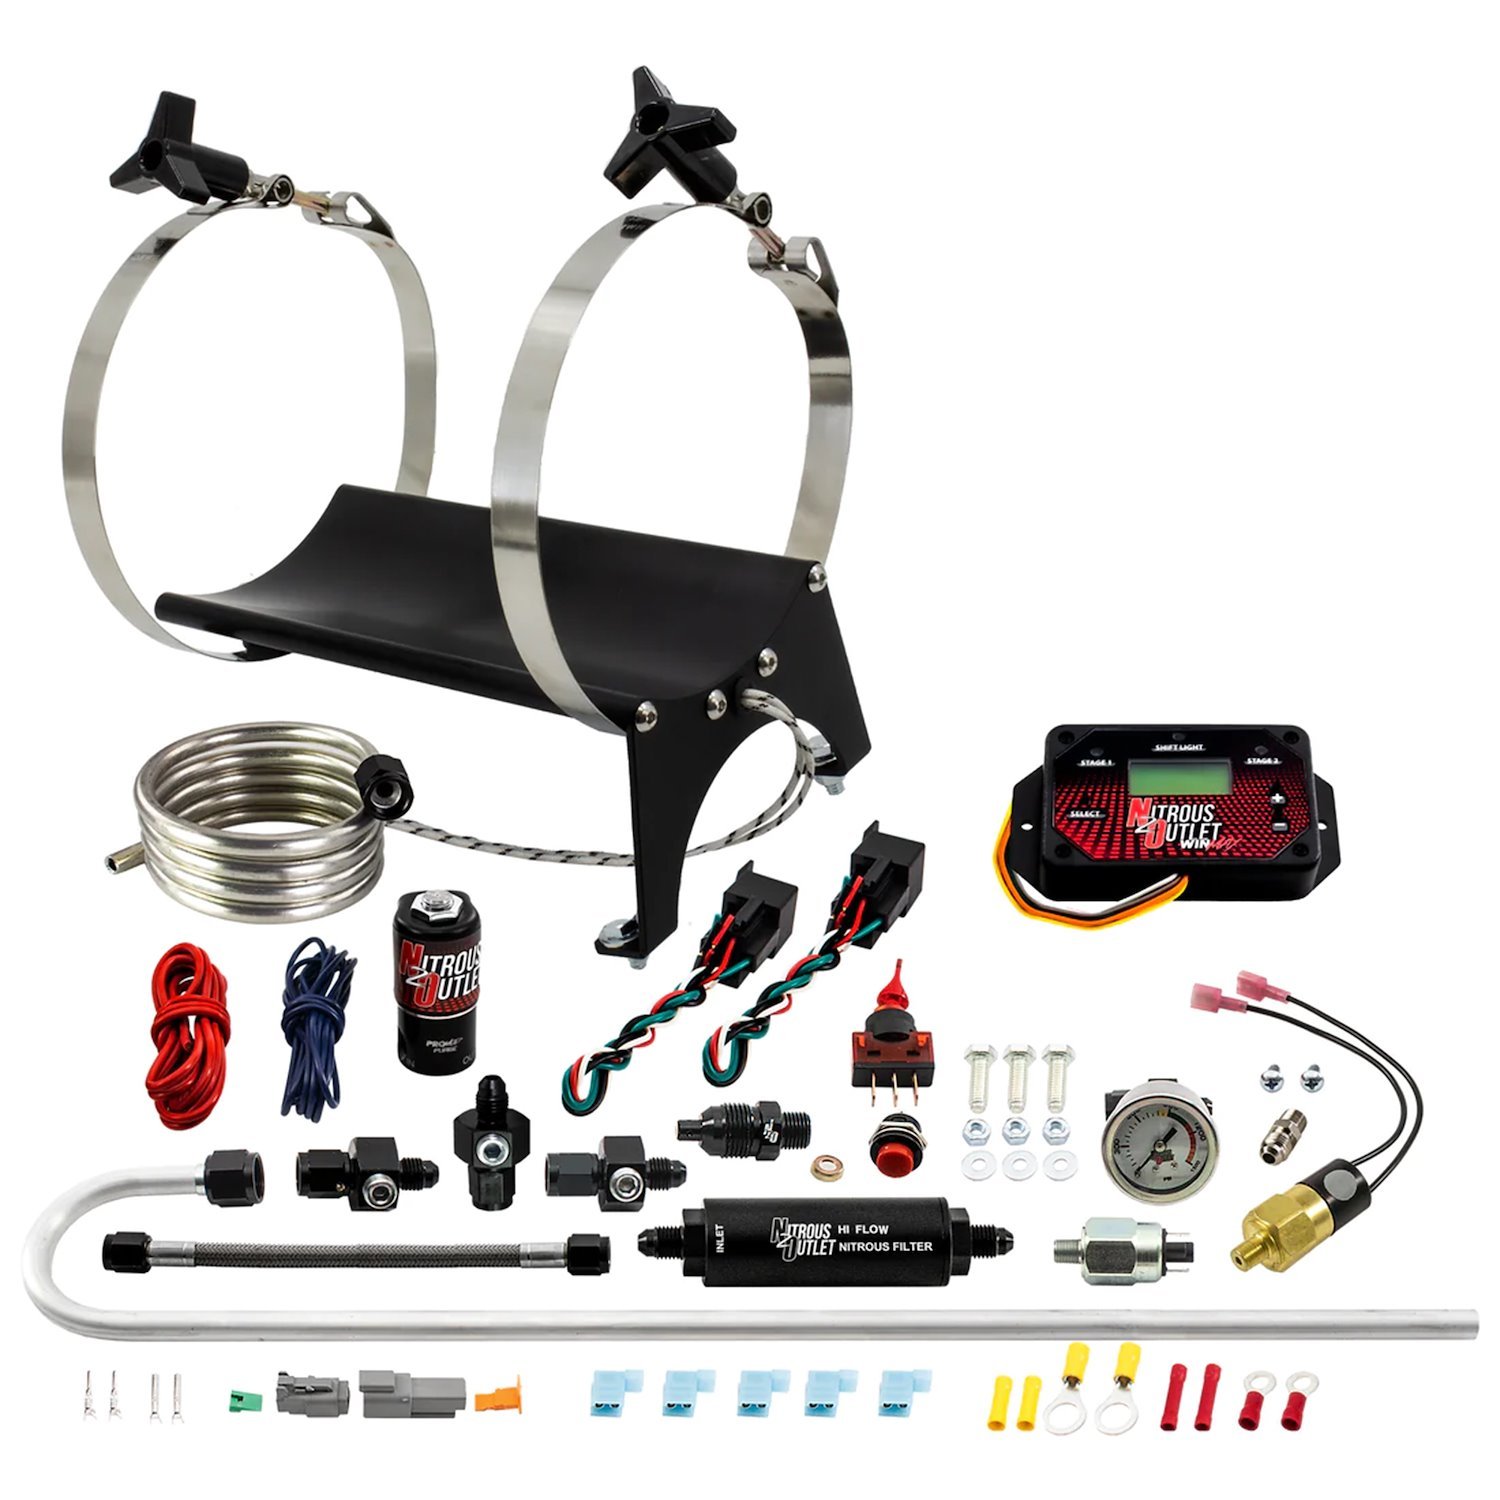 00-69002-H6 Ultimate Nitrous Accessory Package, WinMax, High Fuel Pressure/6AN